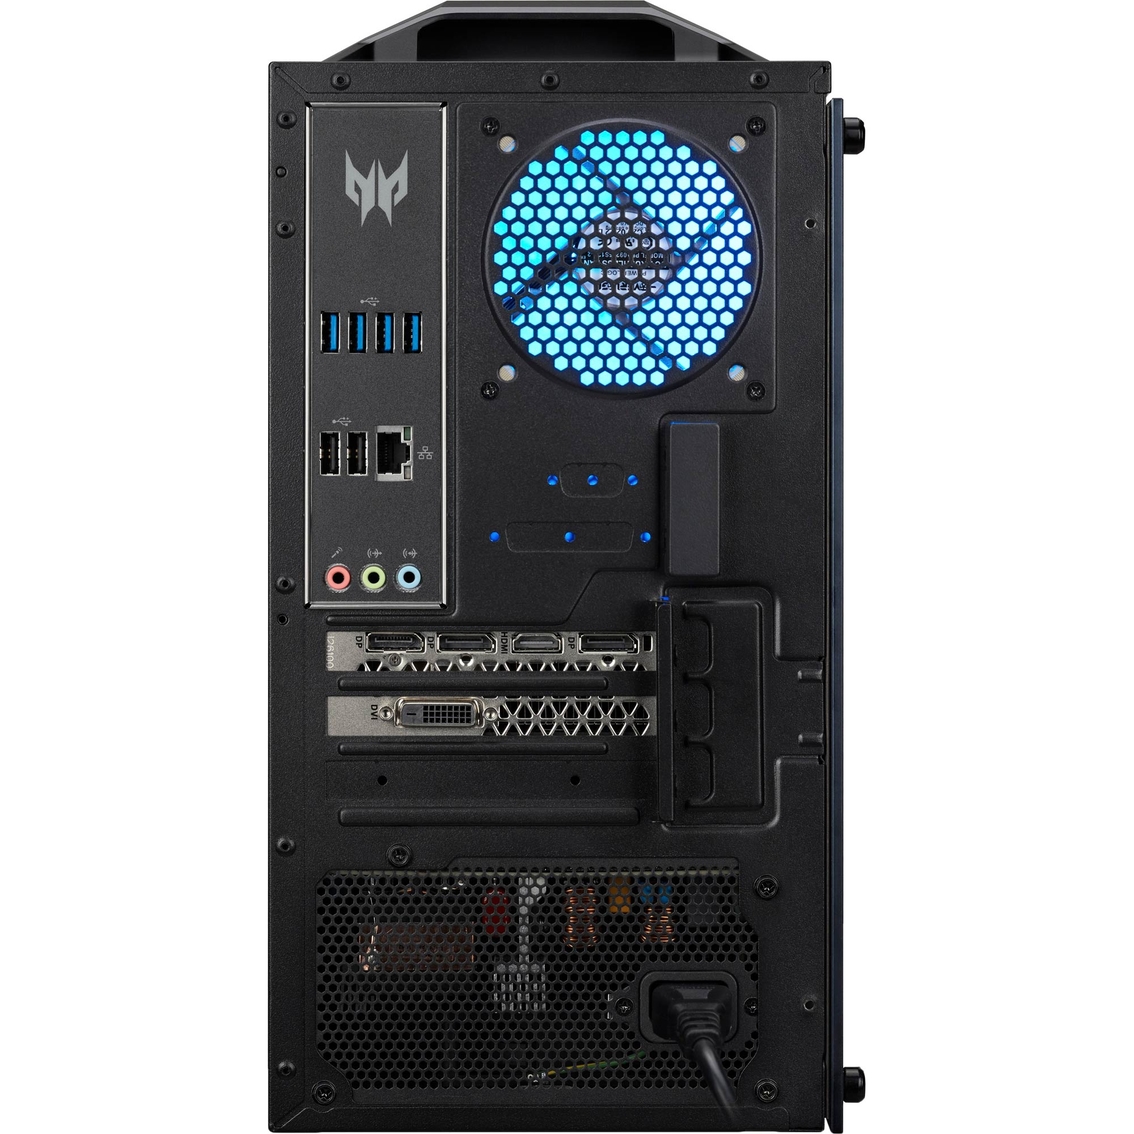 Acer Predator Orion Intel Core i7 3.2GHz 16GB RAM 512GB SSD + 1TB HDD Gaming PC - Image 3 of 4